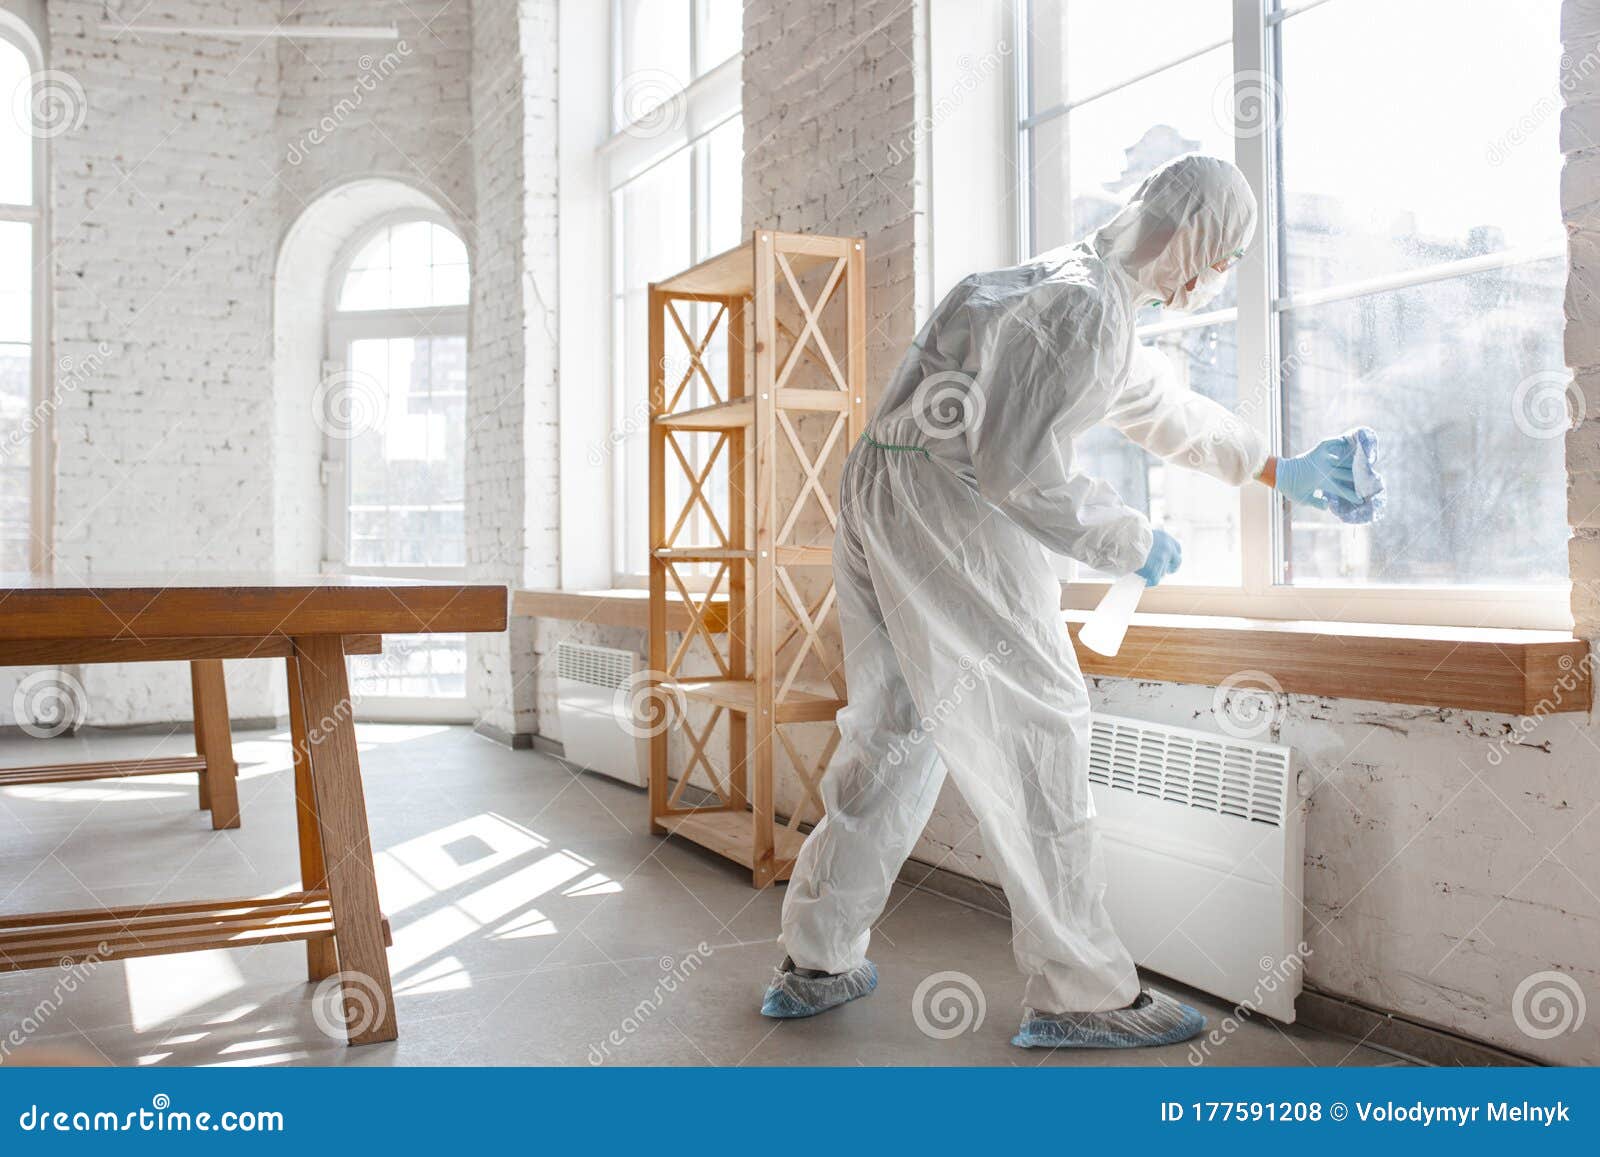 coronavirus pandemic. a disinfector in a protective suit and mask sprays disinfectants in the house or office